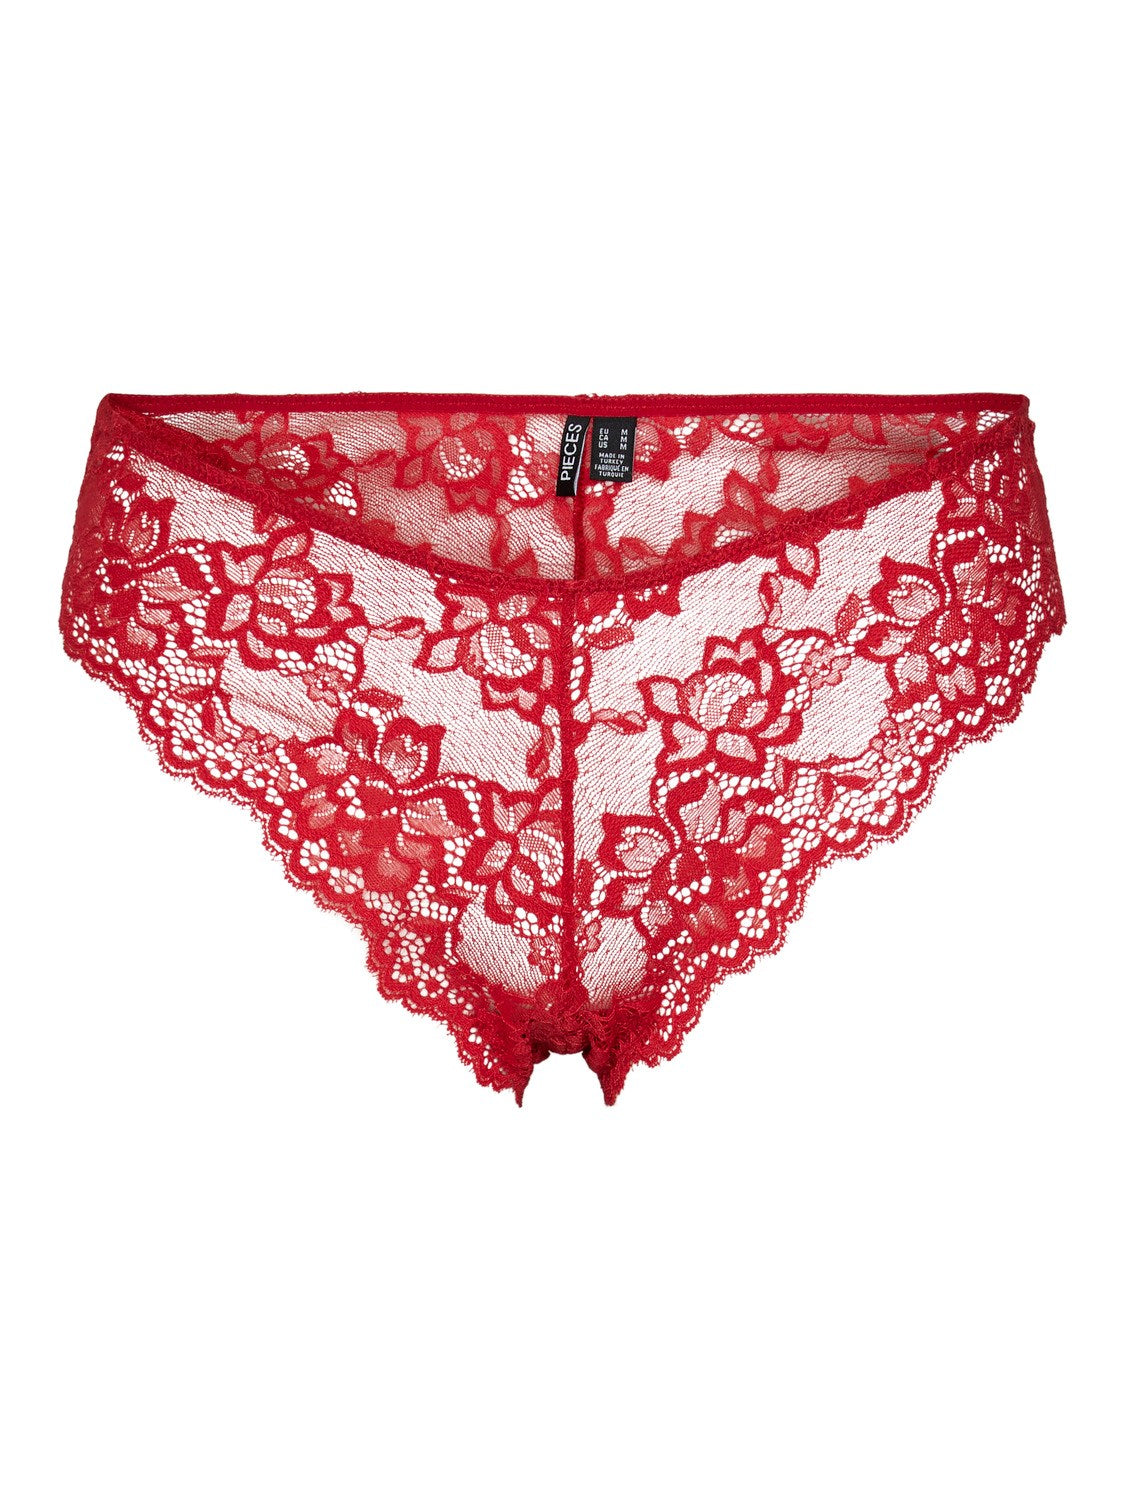 PCLINA 2-PACK LACE UNDERWEAR